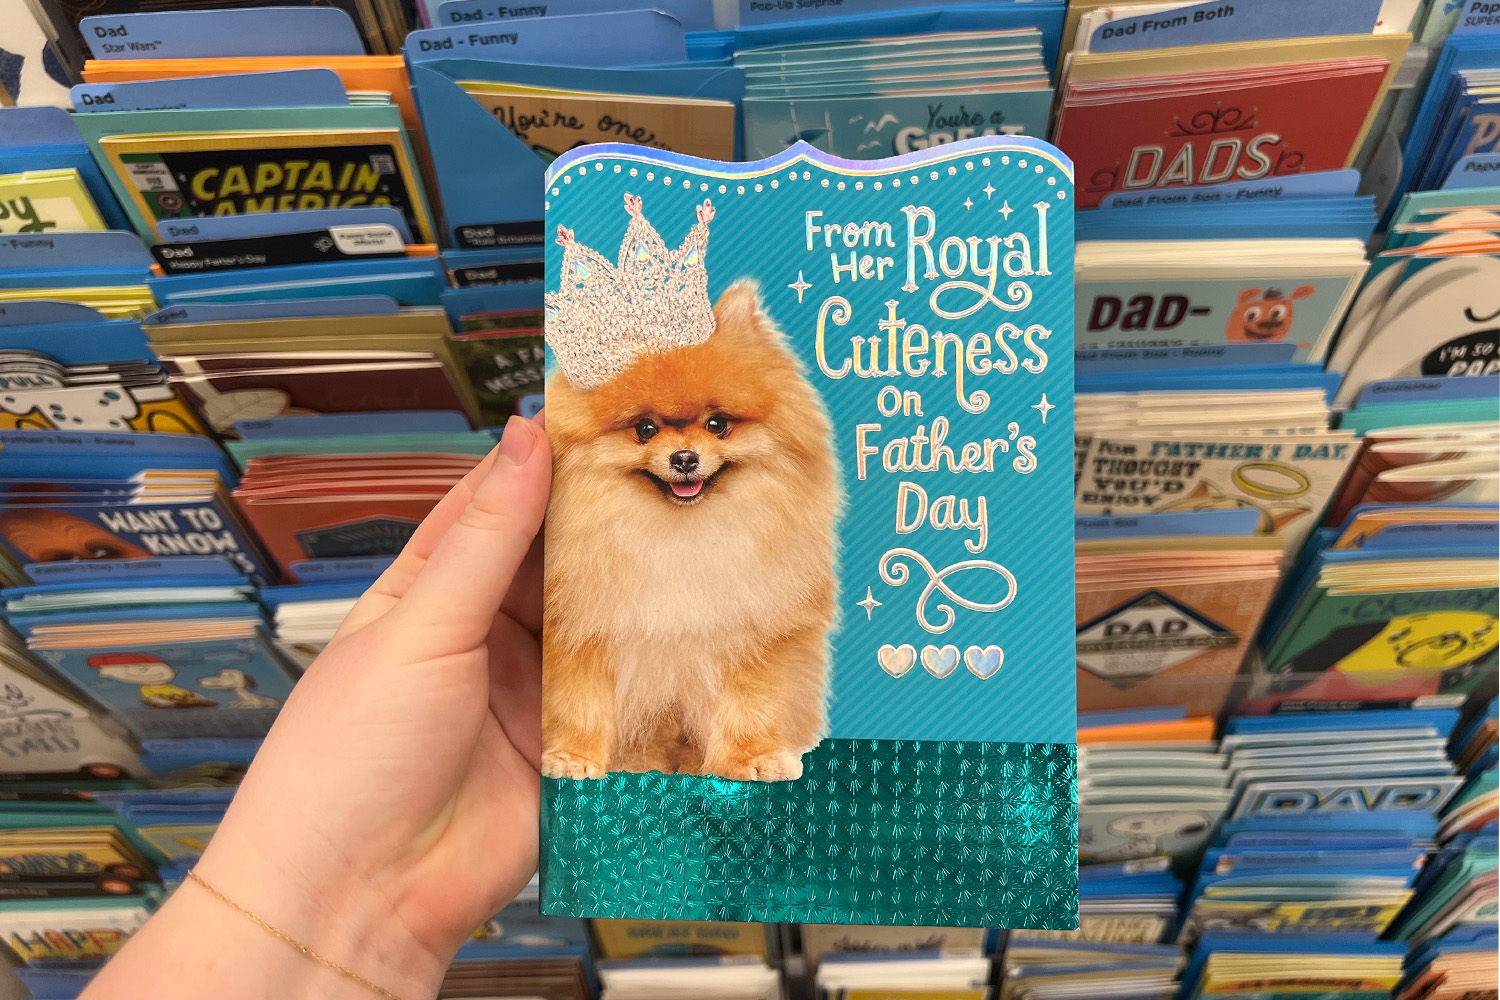 Father's Day card from daughter with a Pomeranian in a tiara on it